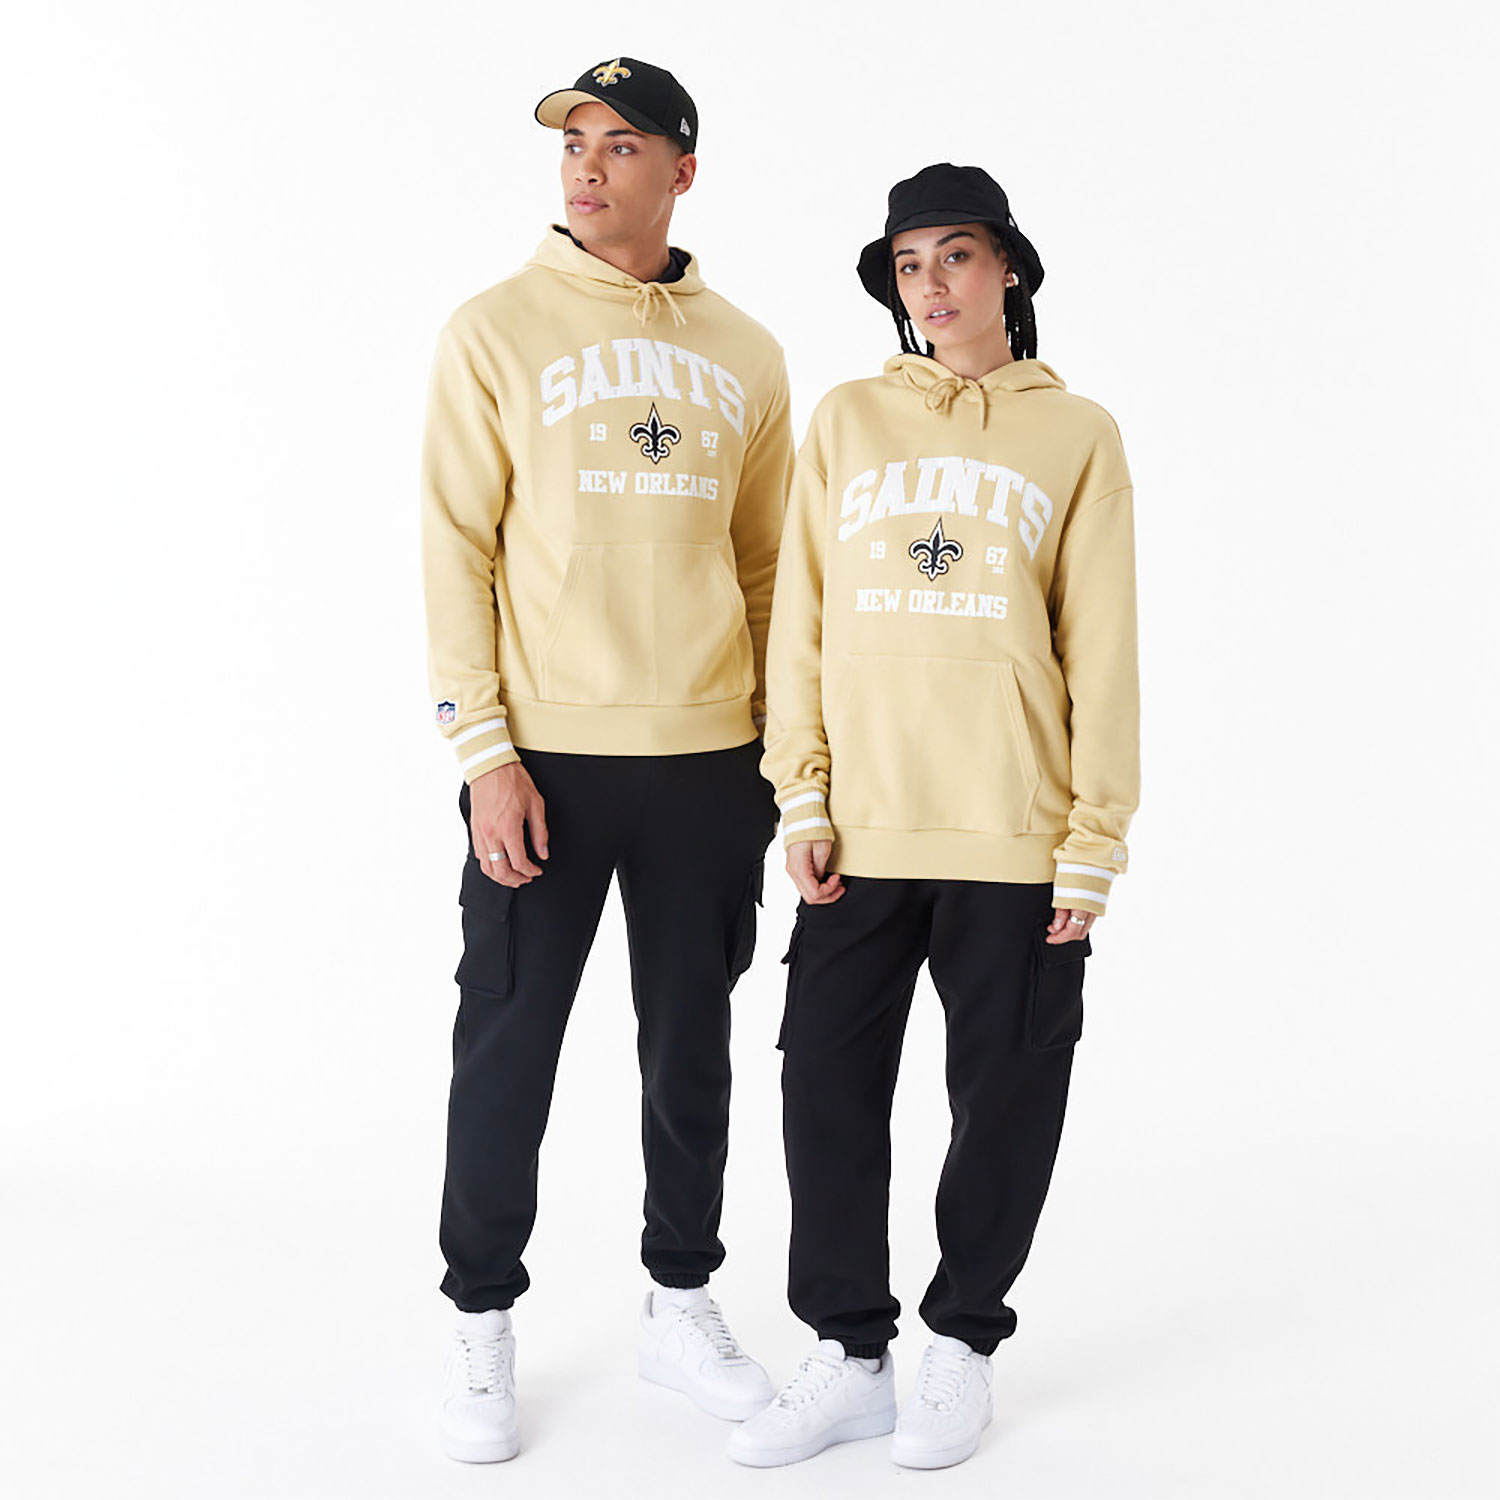 New Orleans Saints NFL Stone Oversized Pullover Hoodie